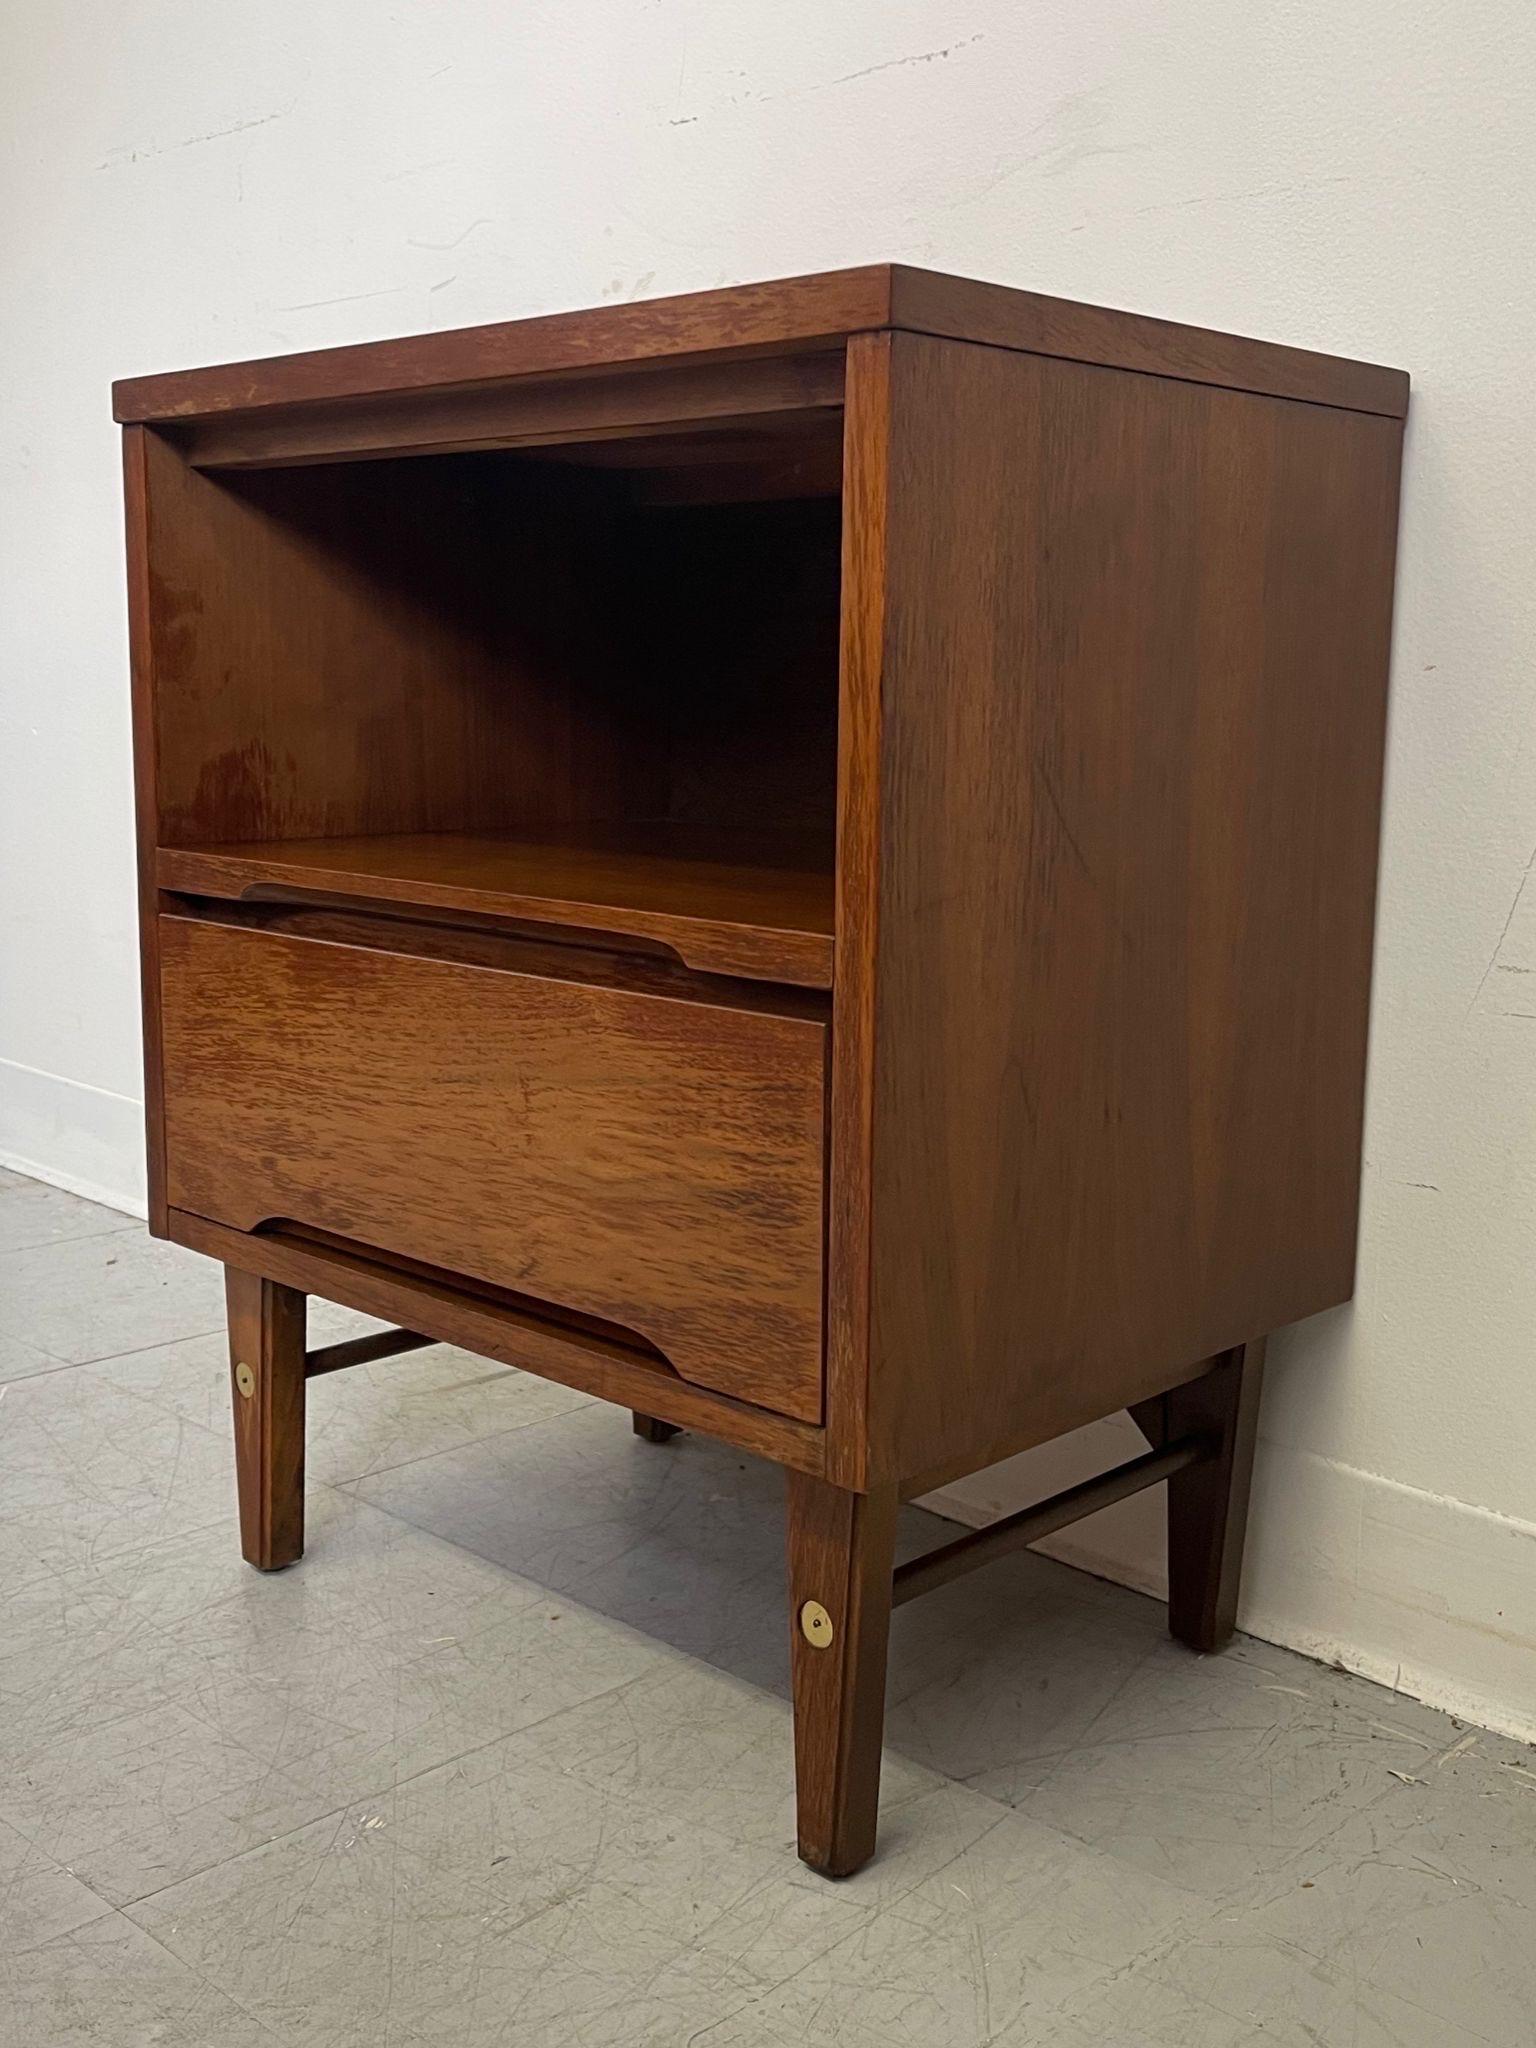 This End Table has an open shelf above a single dovetailed drawer with the maker’s mark inside. Wood carved recessed handle. Tapered legs with brass toned accents. Vintage Condition Consistent with Age as Pictured.

Dimensions. 20 W ; 24 D ; 24 1/4 H